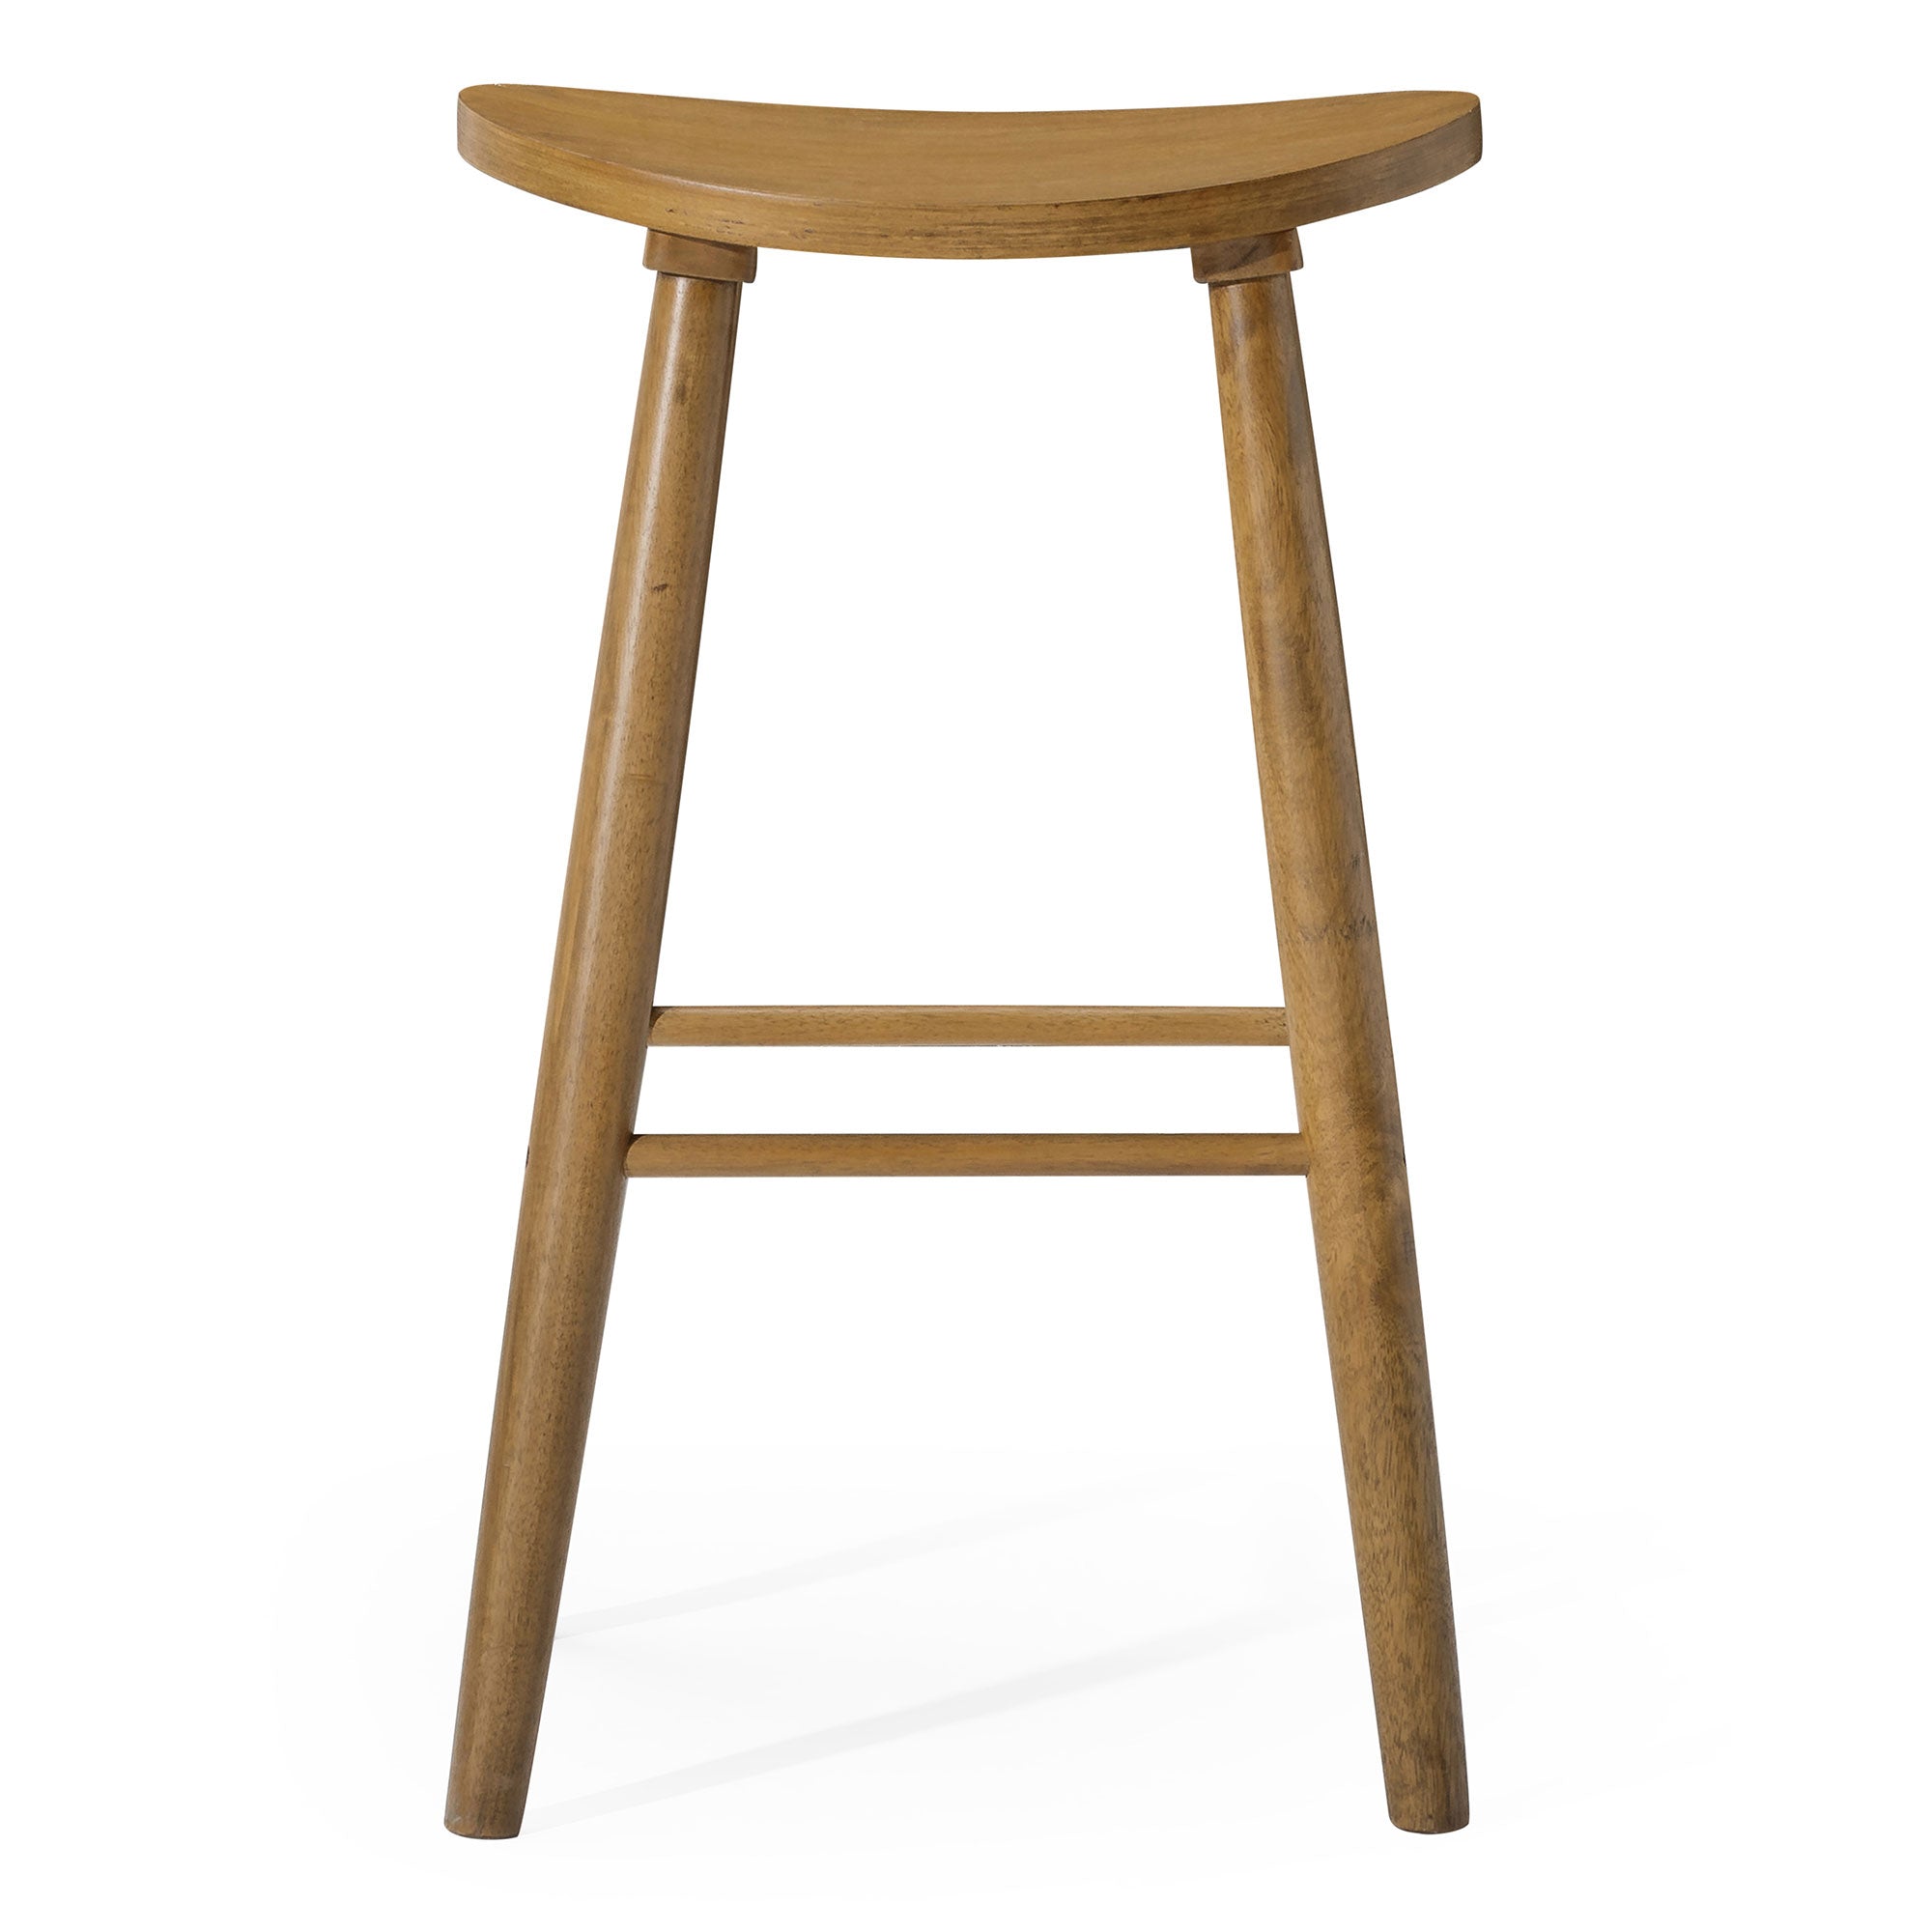 Luna Bar Stool in Rustic Natural Wood Finish in Stools by Maven Lane